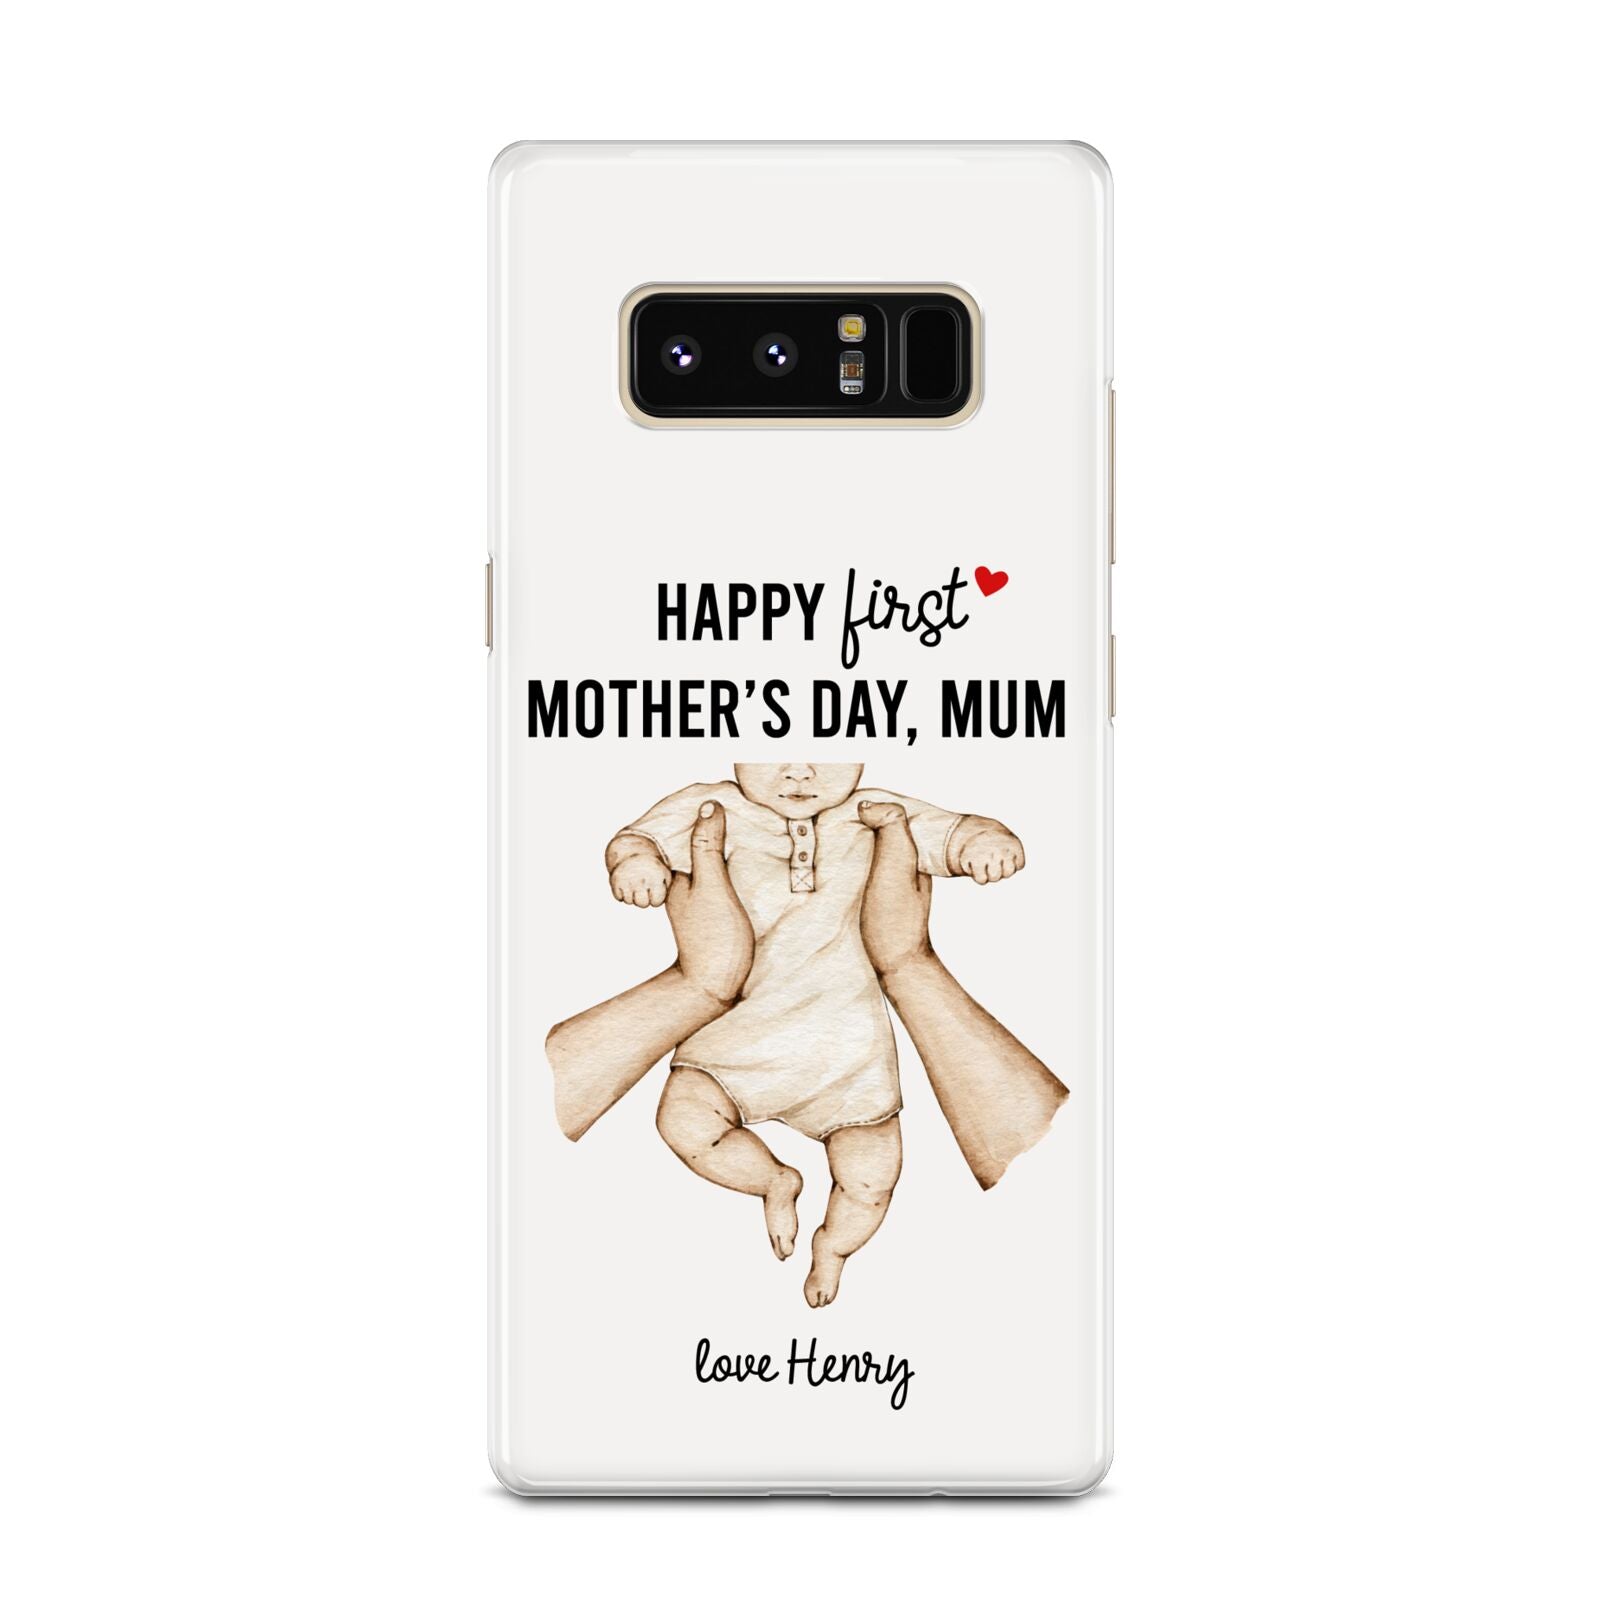 1st Mothers Day Baby Samsung Galaxy Note 8 Case